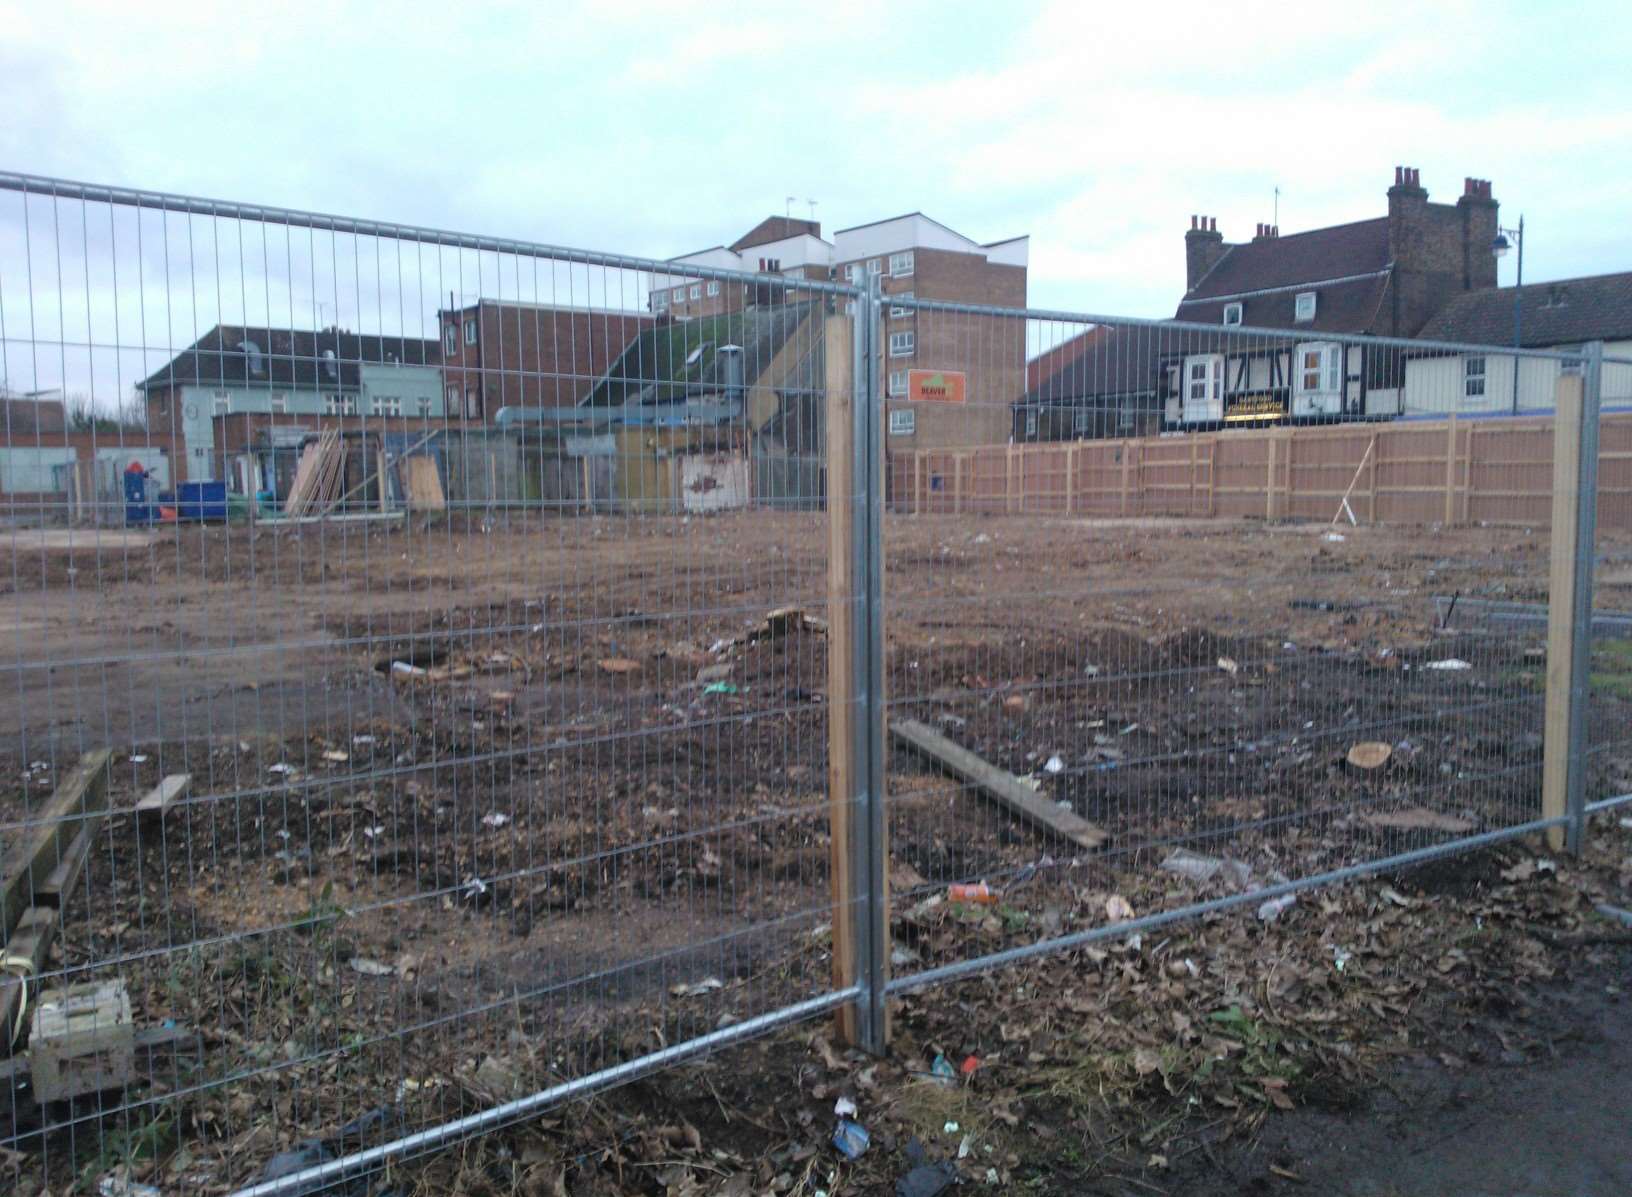 Where Tesco planned to build in Lowfield Street, before the firm pulled the plug on the scheme.